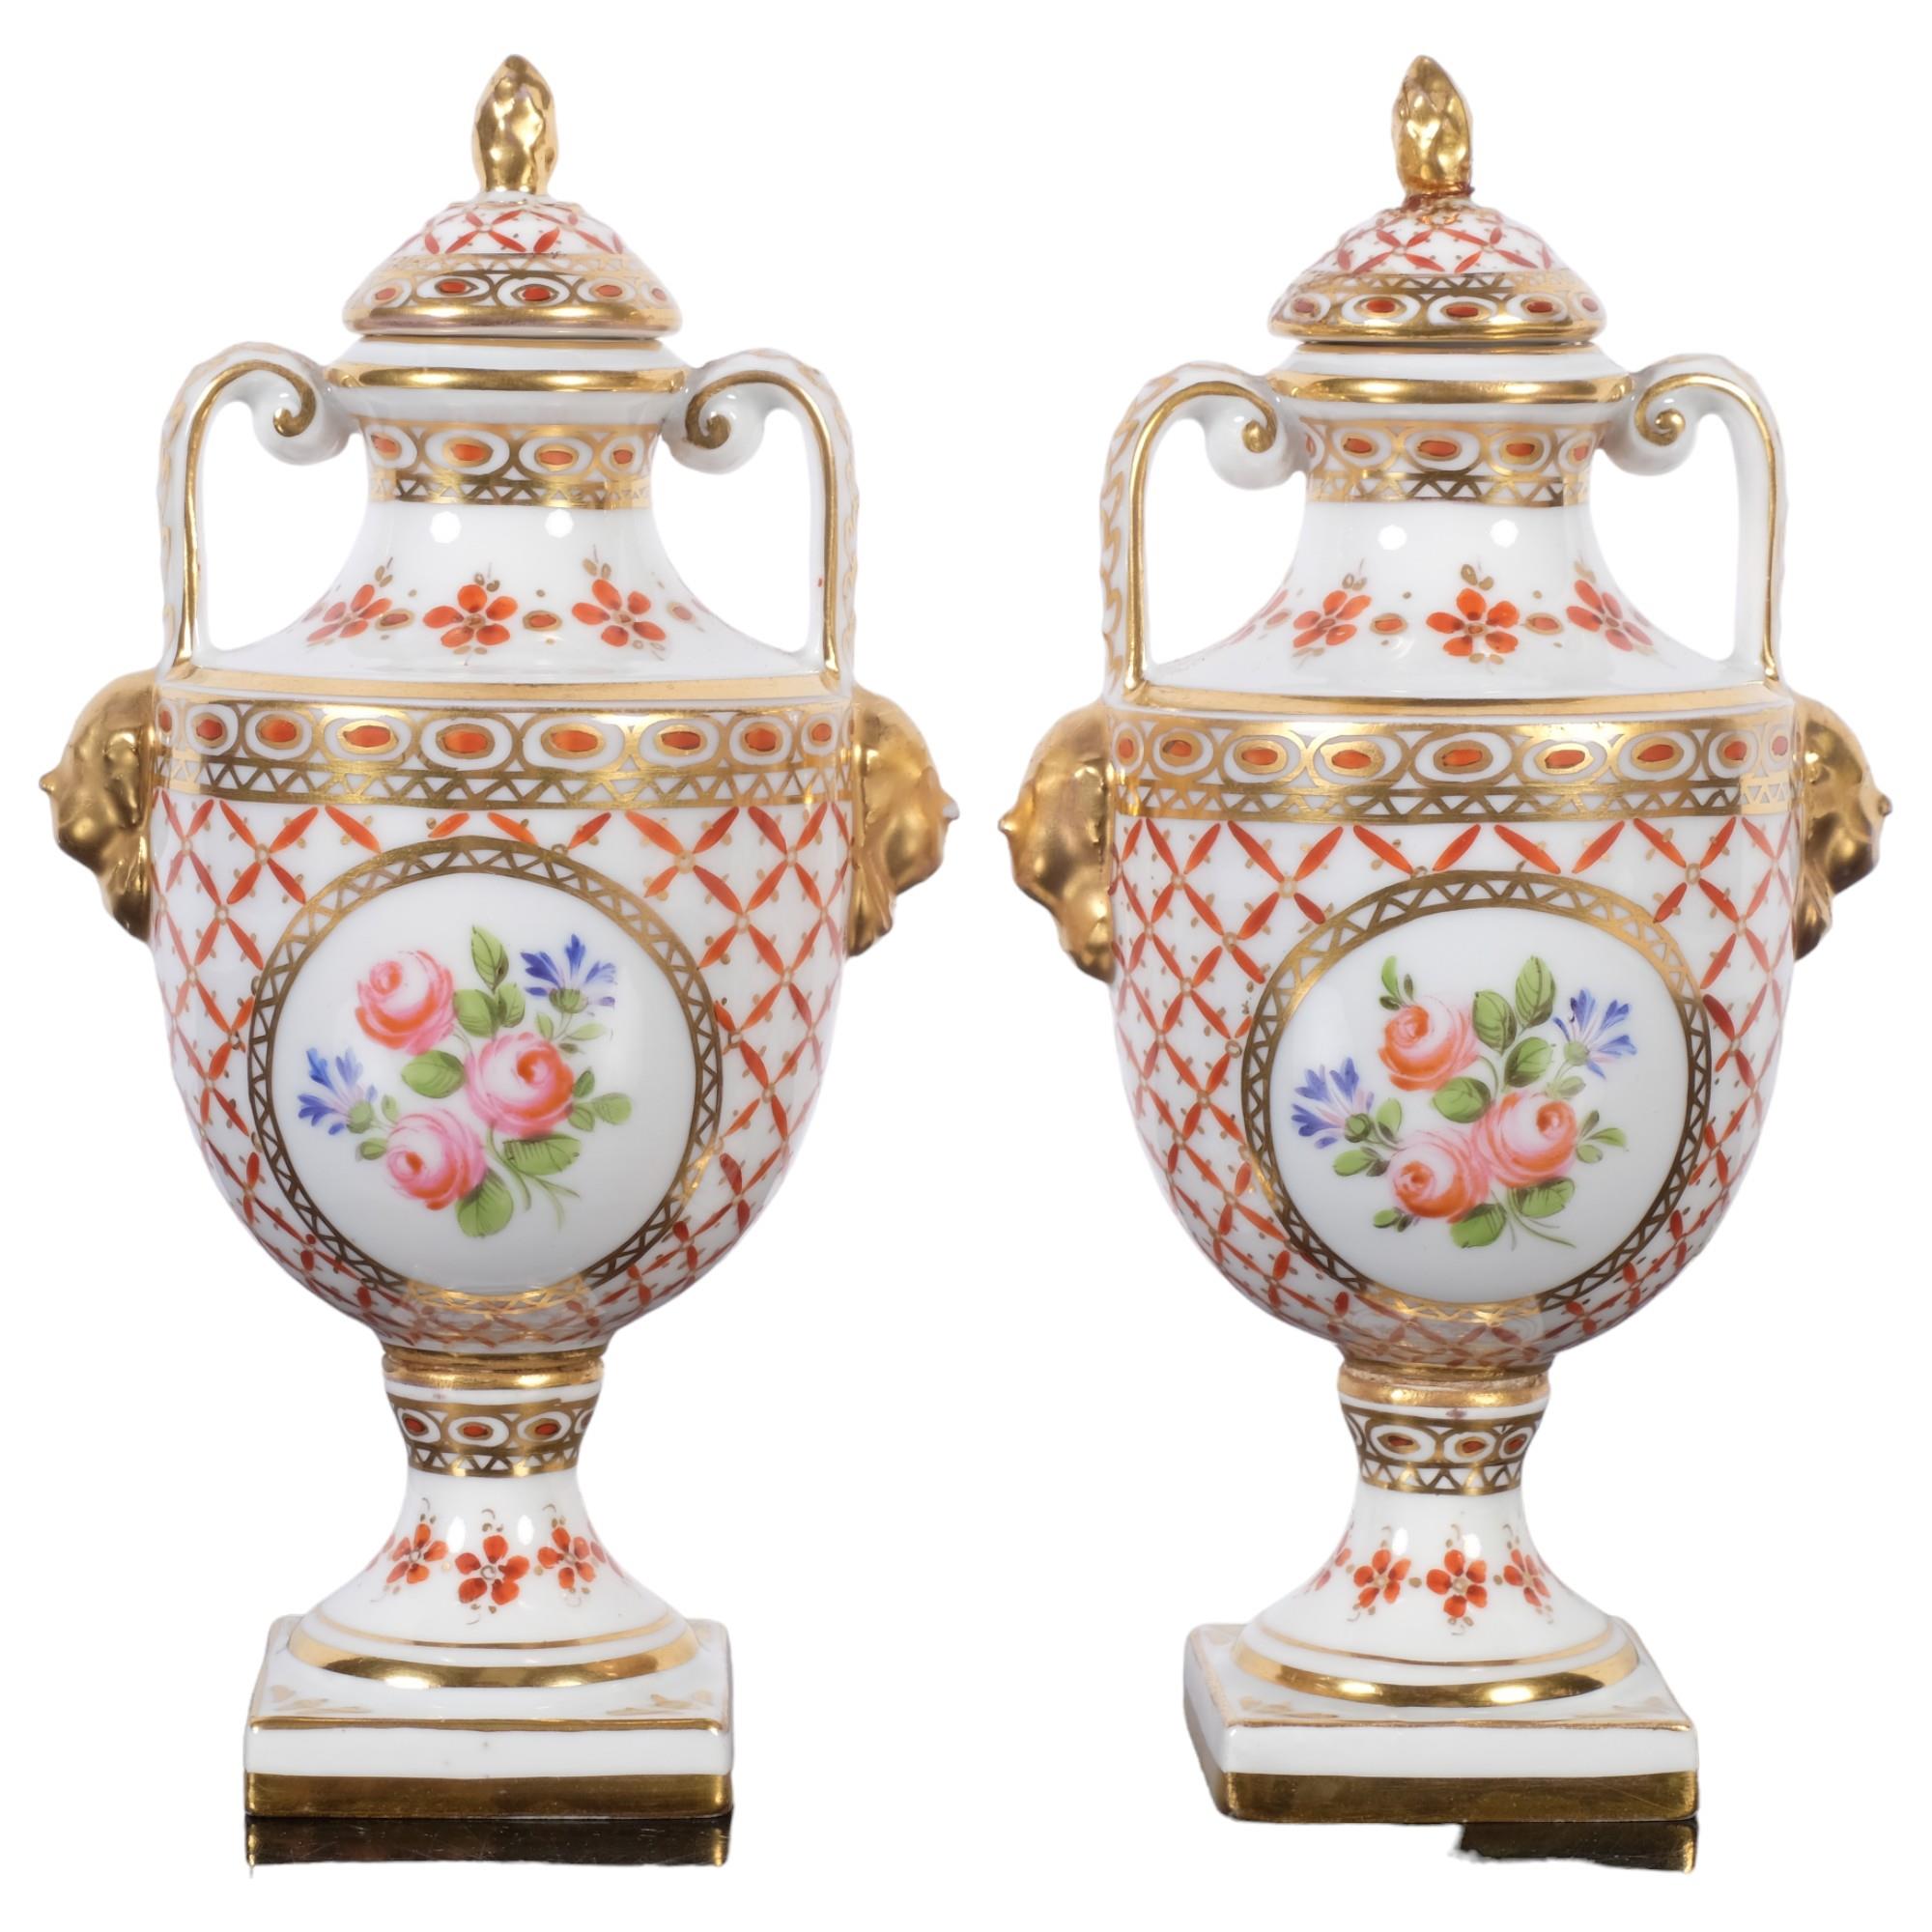 A pair of Antique Sevres porcelain urns and covers, H16.5cm, with impressed mark to the underside